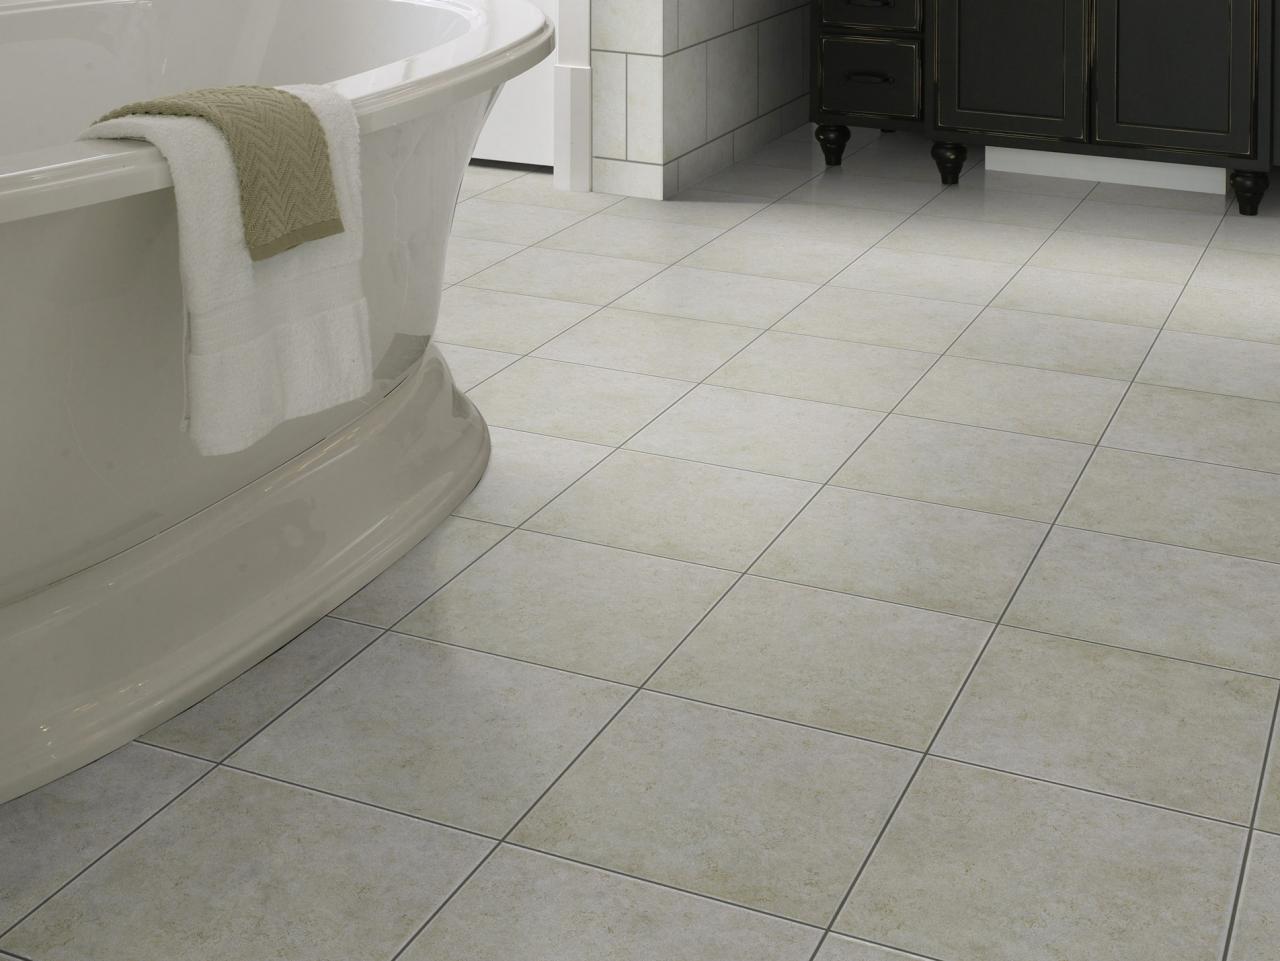 Why Homeowners Love Ceramic Tile, Cost To Tile Floor Bathroom